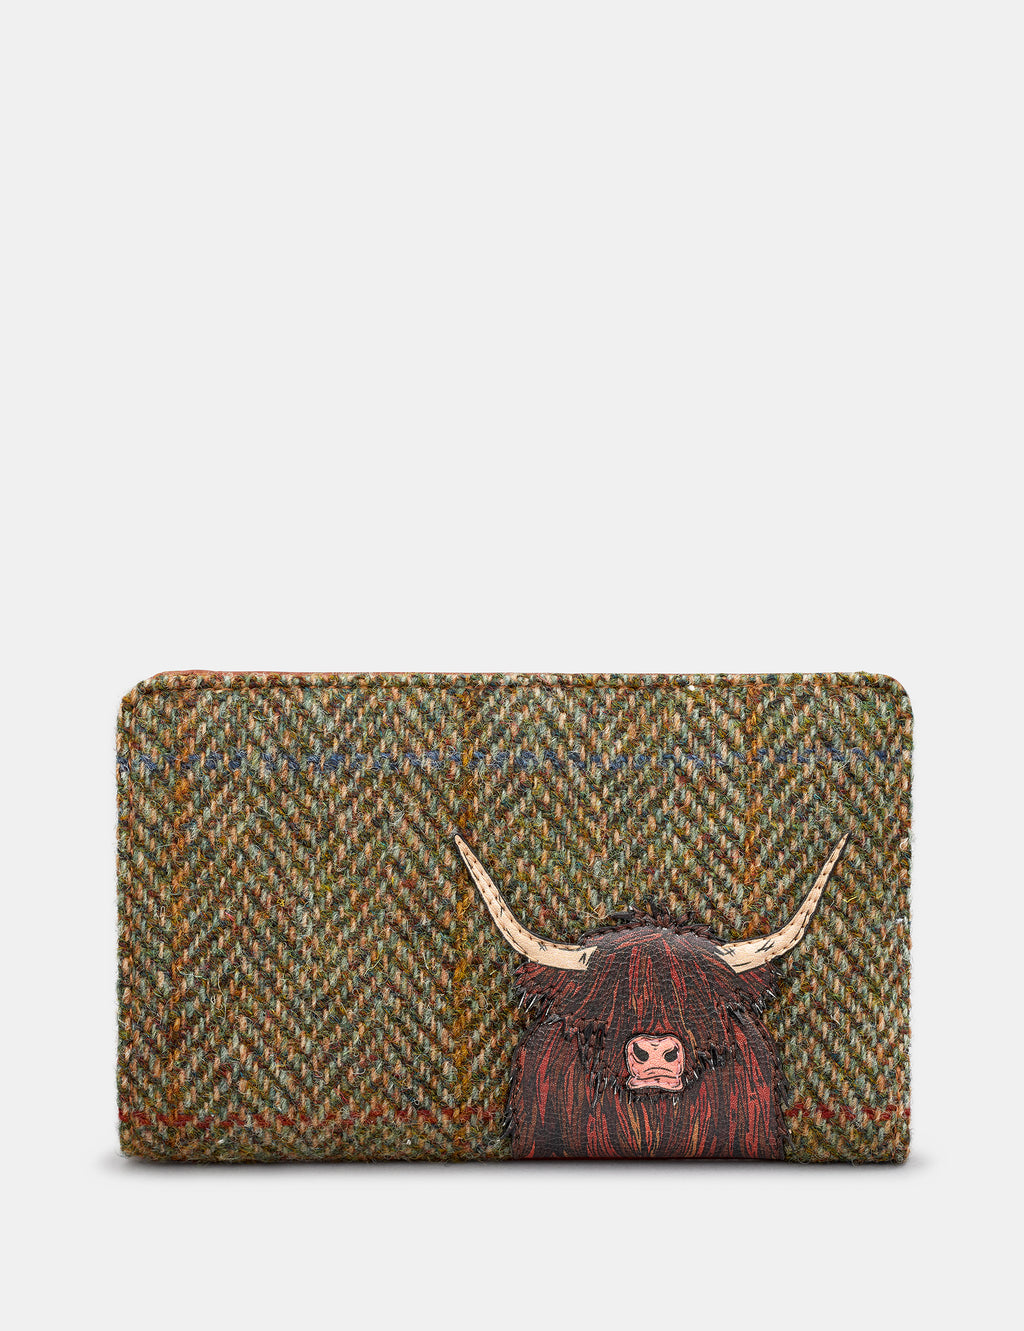 Highland Cow Tweed Flap Over Zip Around Leather Purse